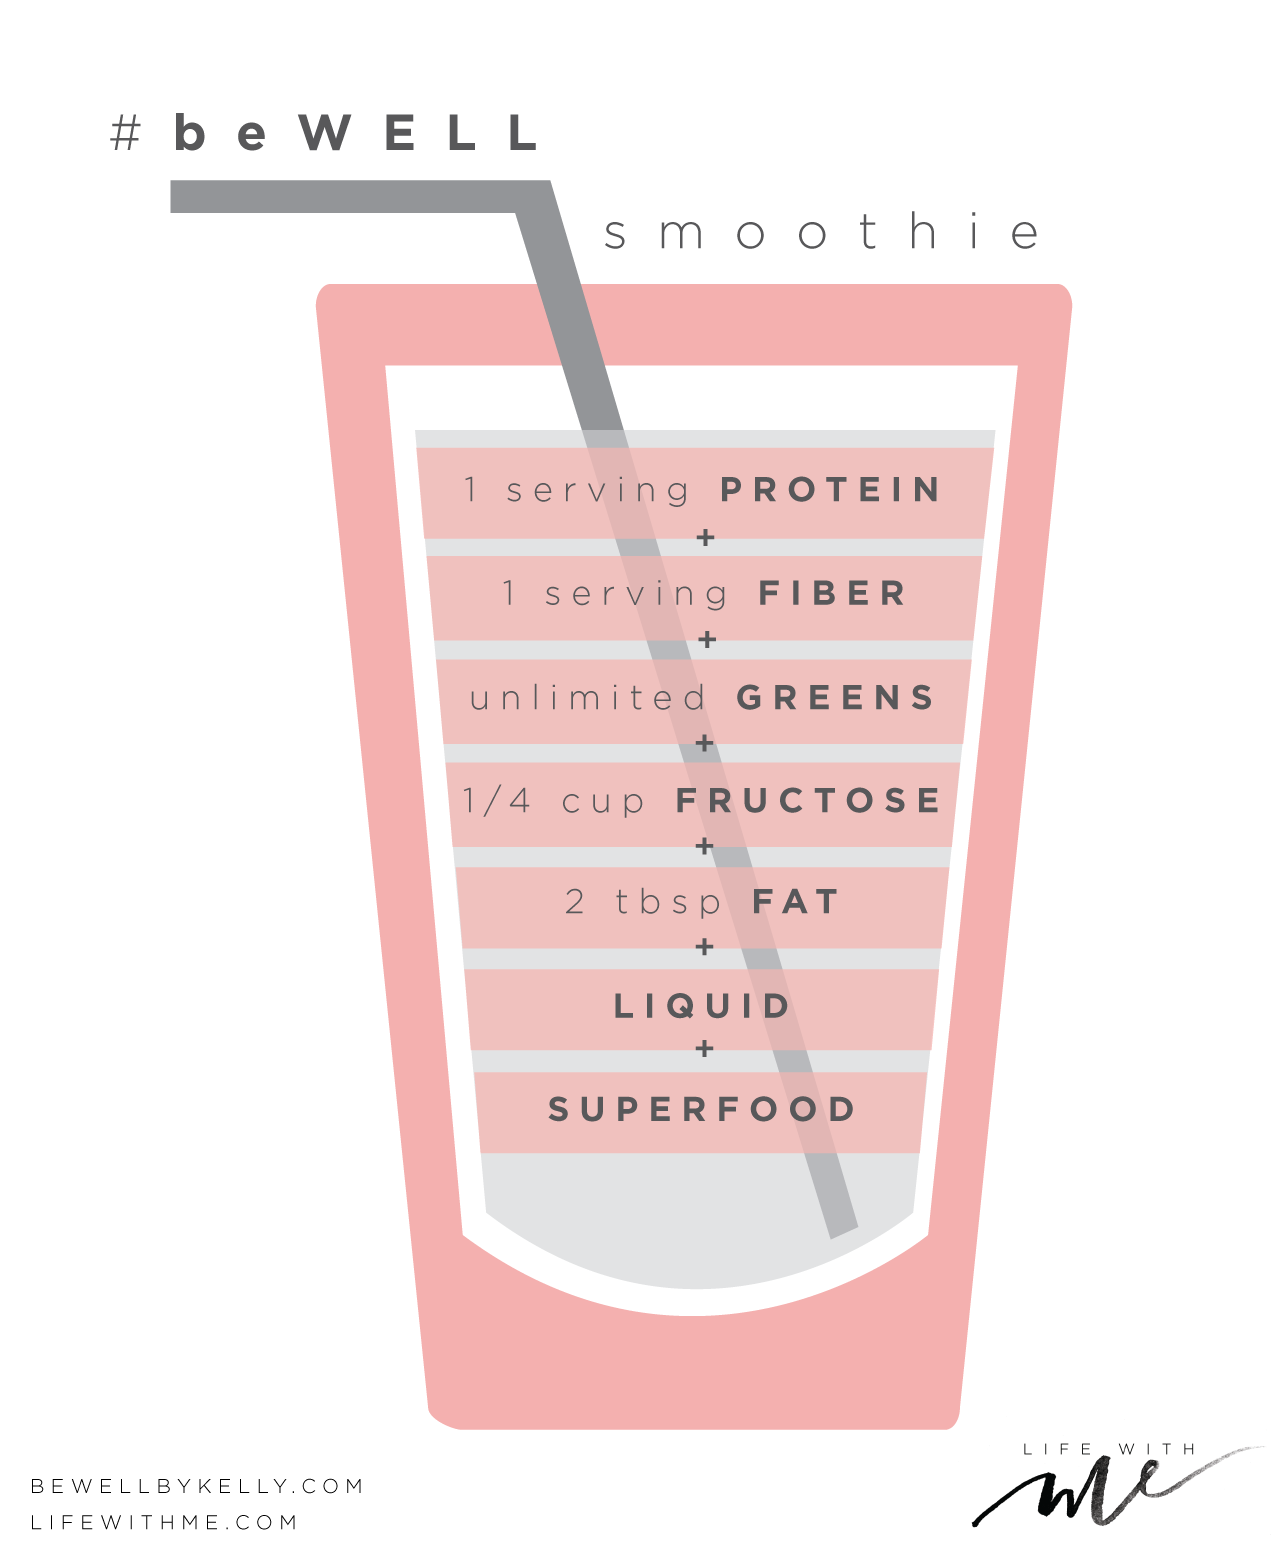 https://lifewithme.com/wp-content/uploads/2015/08/marianna-hewitt-be-well-by-kelly-smoothie-bewellsmoothie-perfect-smoothie-recipie-ingredients.png